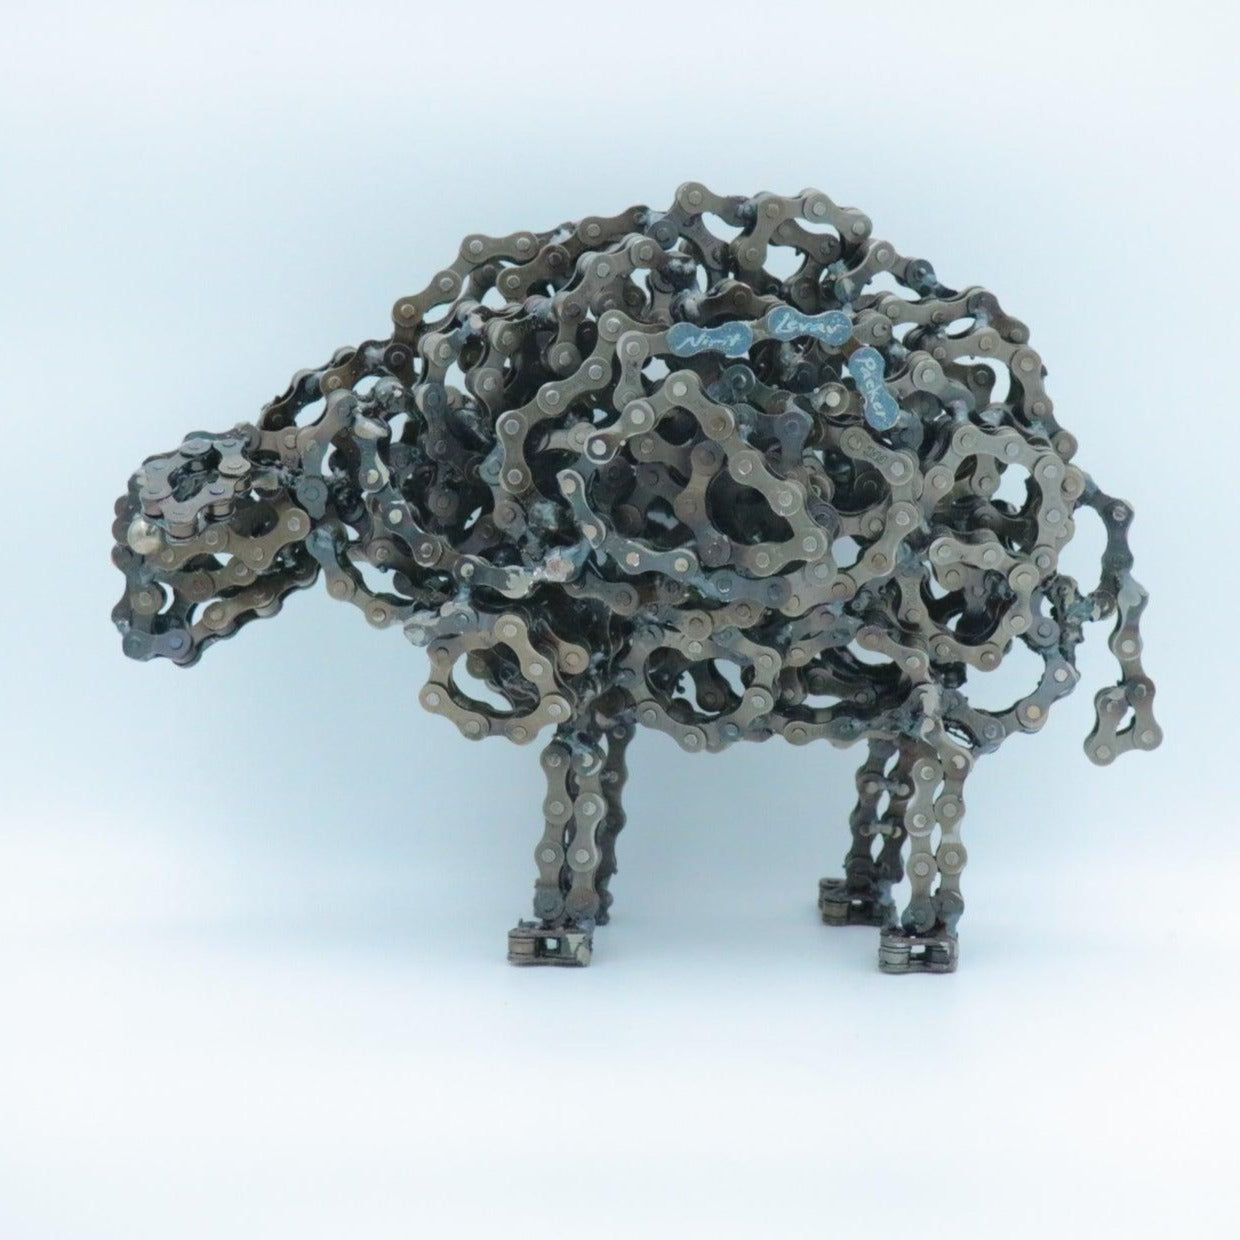 Sheep Sculpture | UNCHAINED by NIRIT LEVAV PACKER